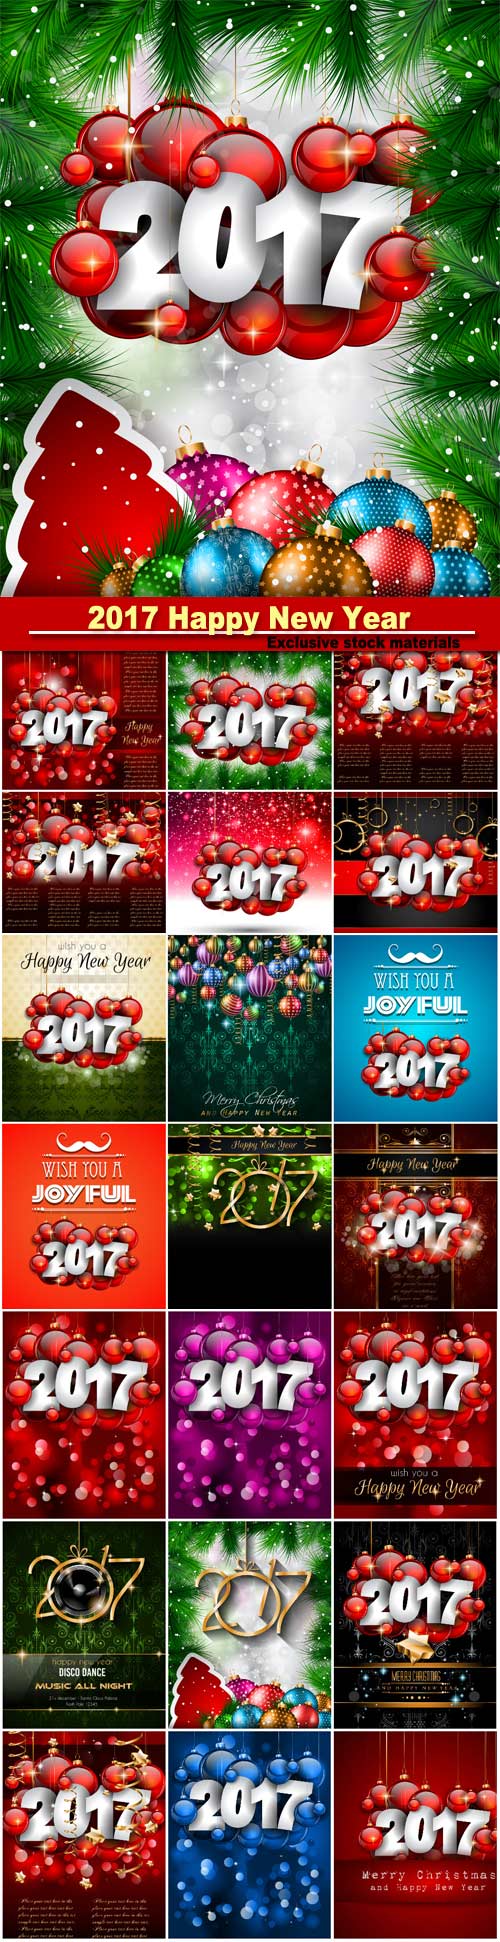 2017 Happy New Year background, flyers and greetings card or christmas them ...